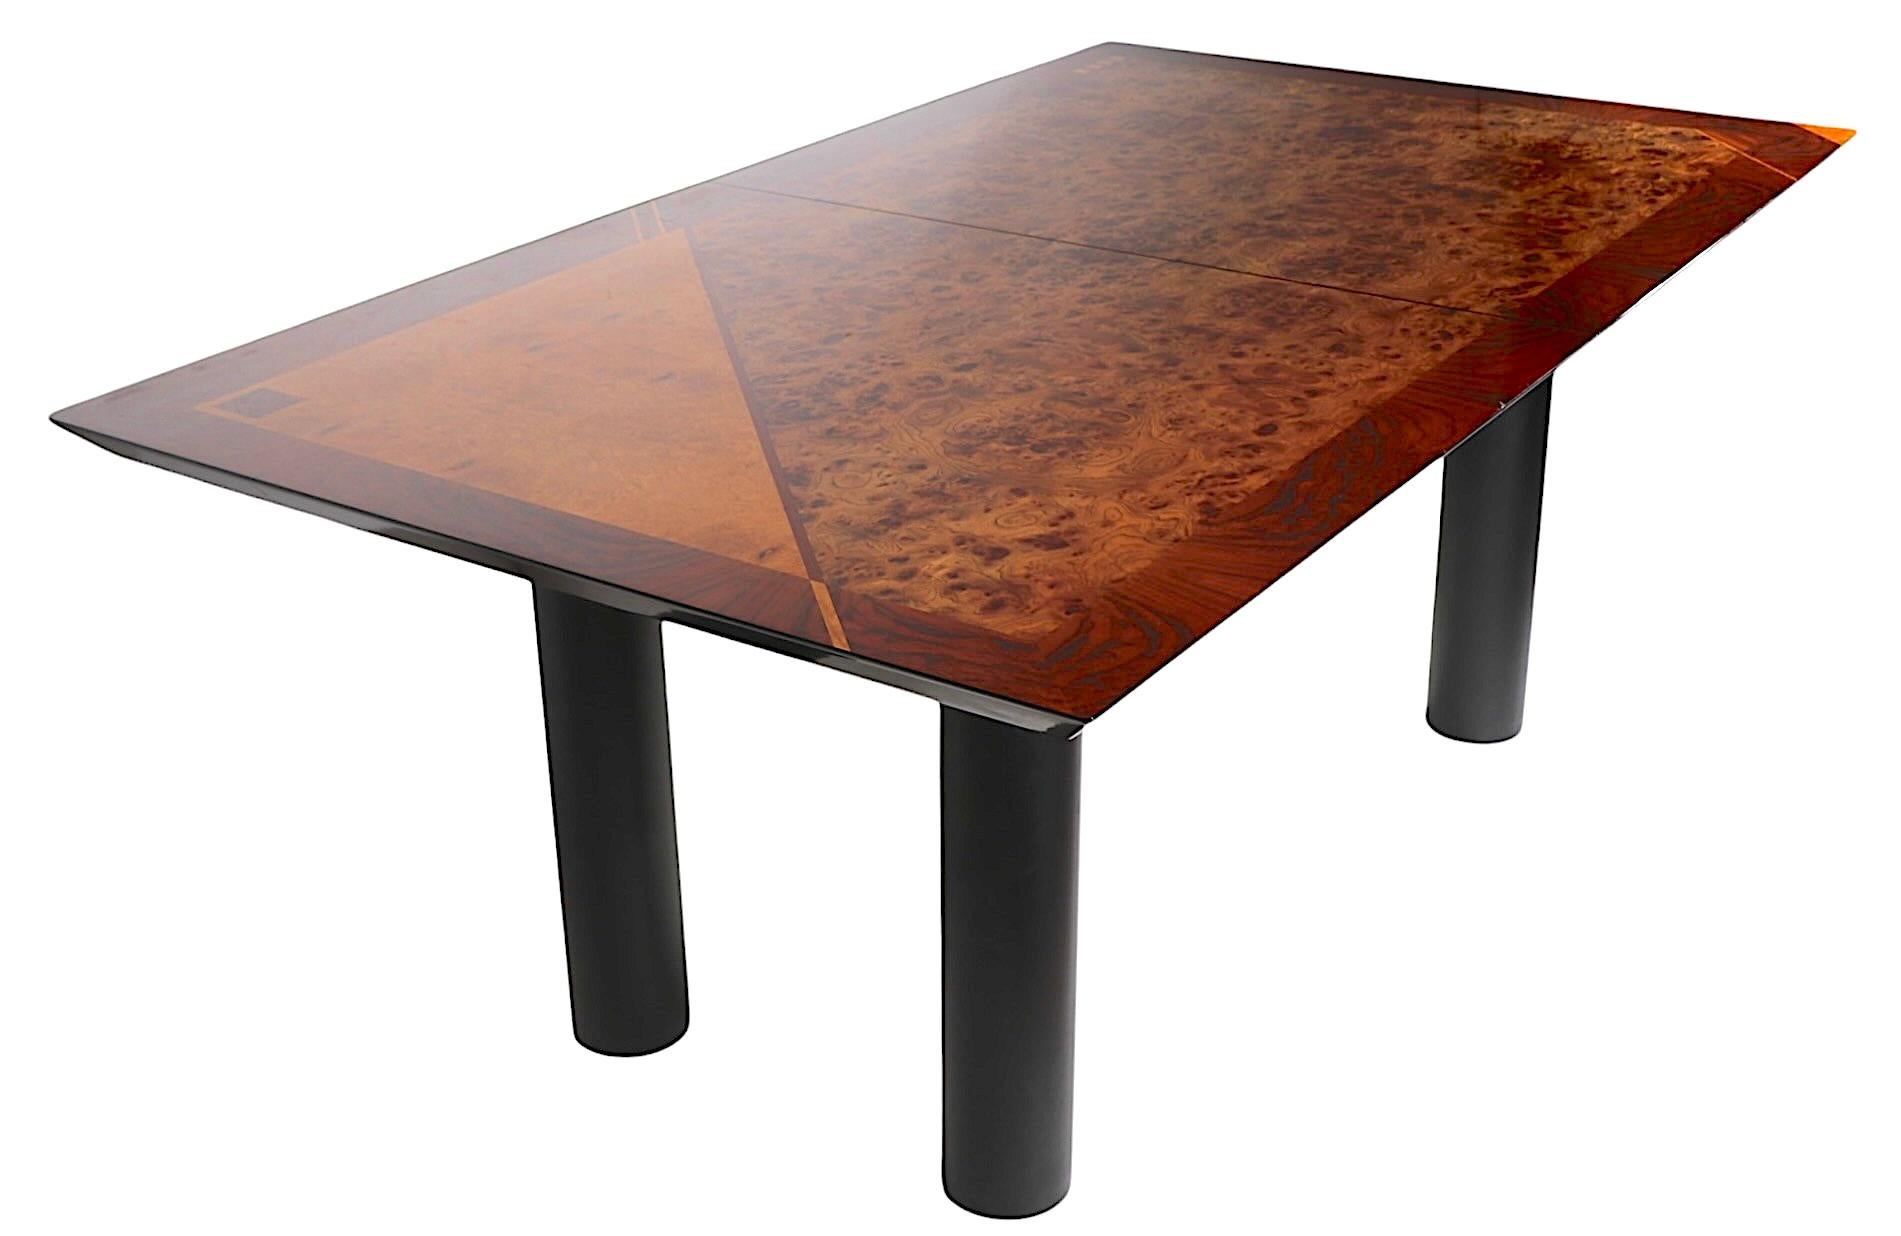 Italian Post Modern Dining Table by Oscar Dell Arredamento for Miniforms c 1970s For Sale 1